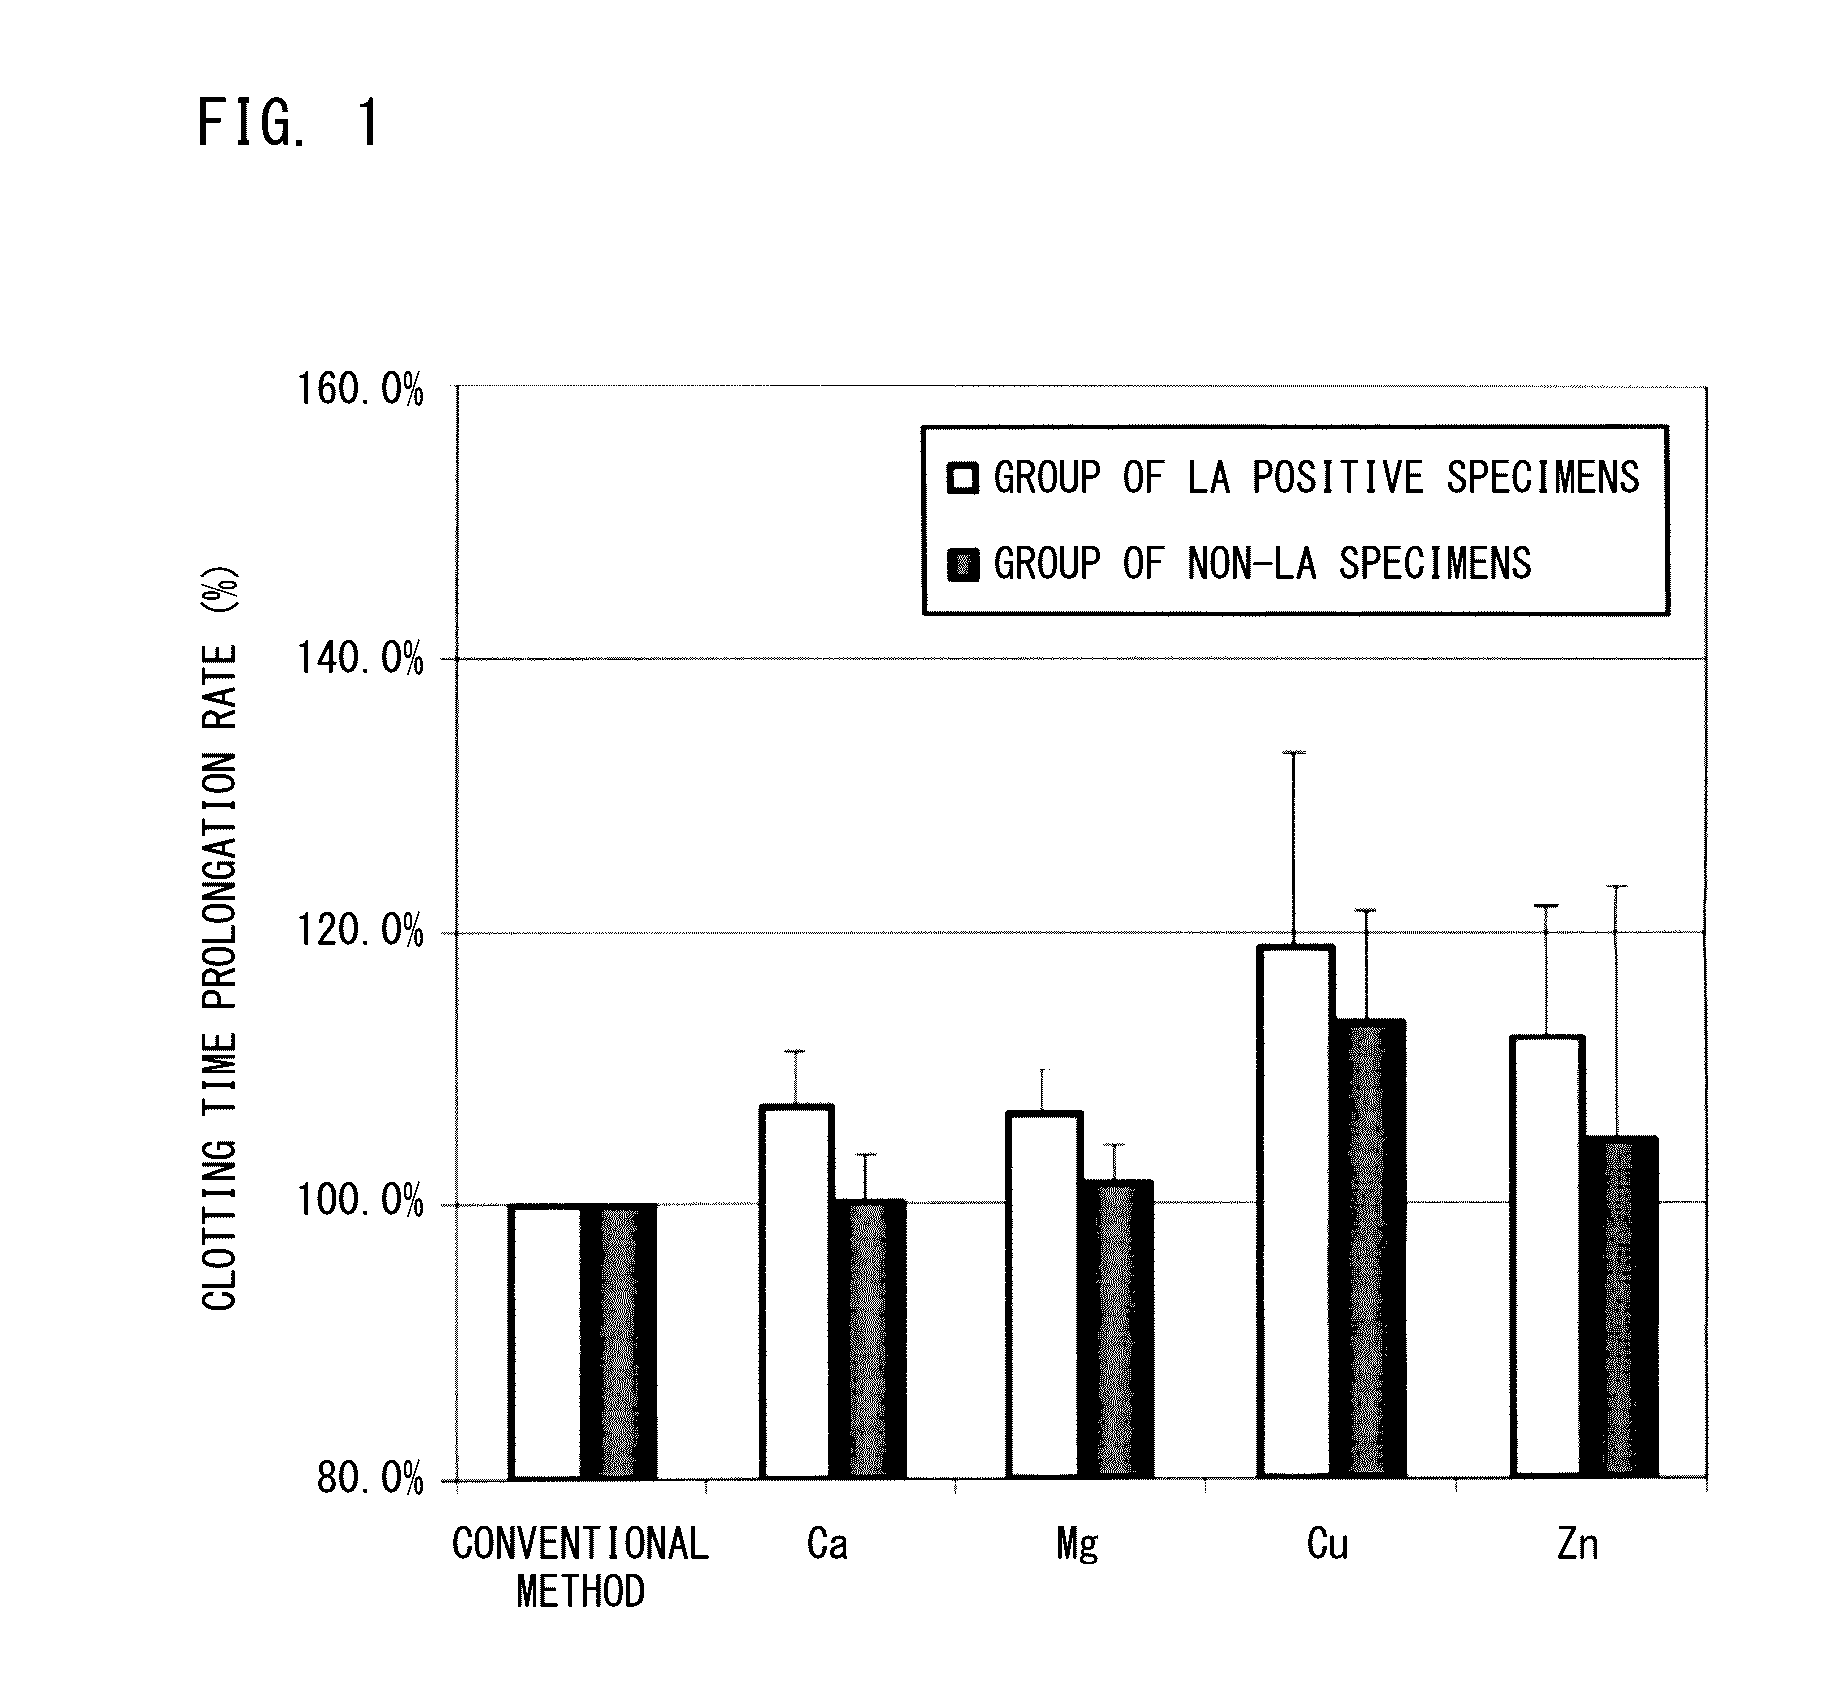 Method for measuring clotting time, method for determining presence or absence of lupus anticoagulant, and reagent kit for detecting lupus anticoagulant